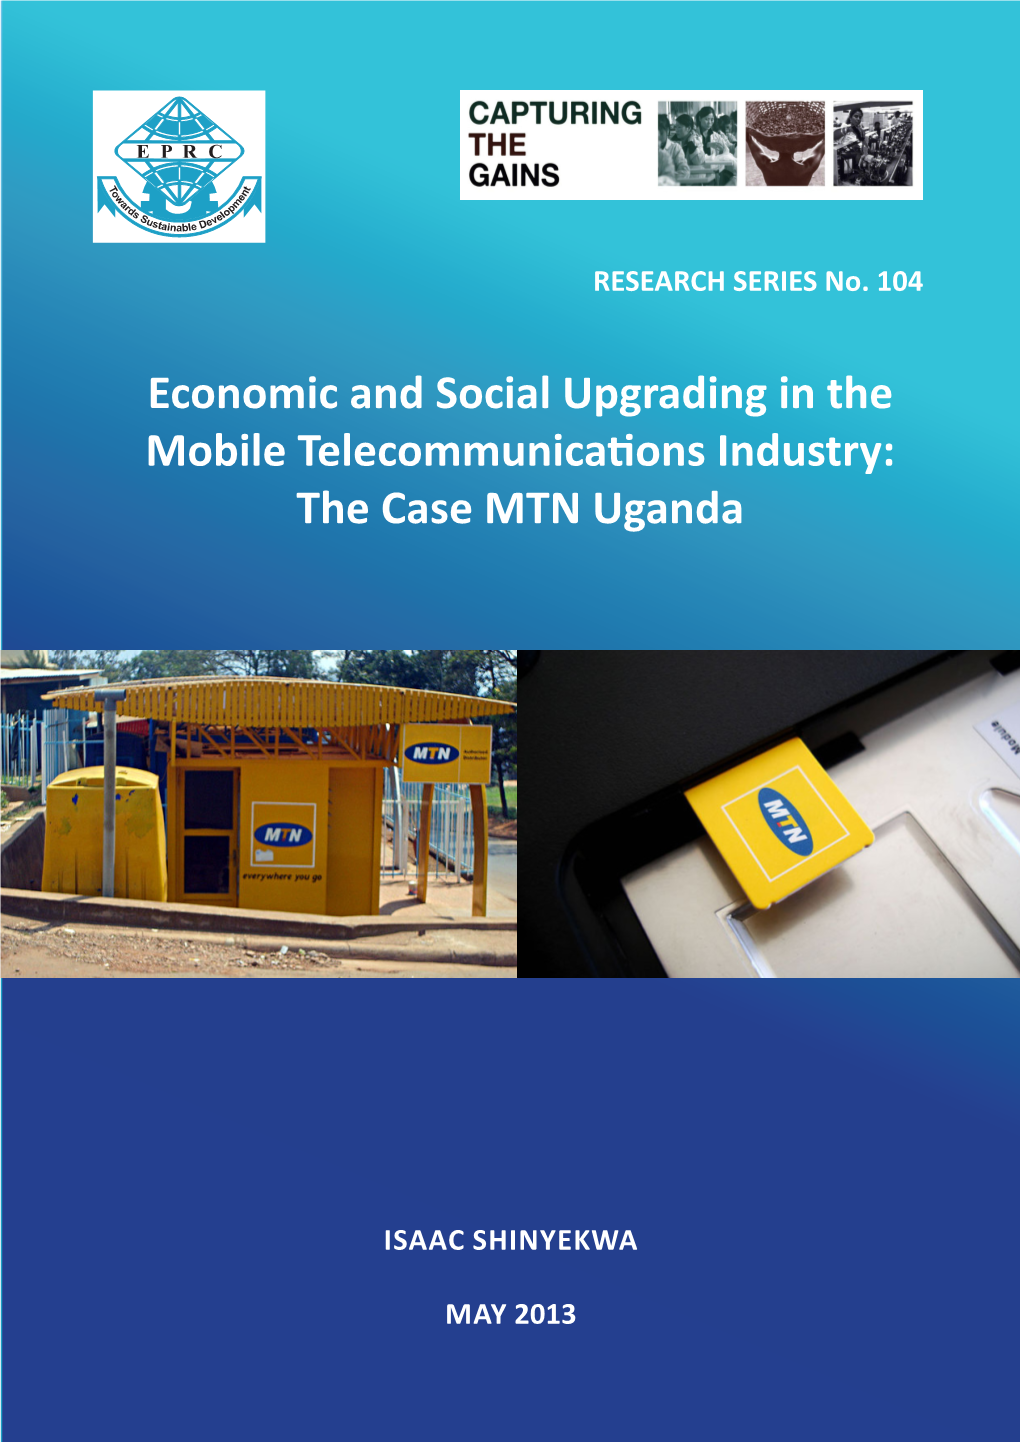 Economic and Social Upgrading in the Mobile Telecommunications Industry: the Case MTN Uganda